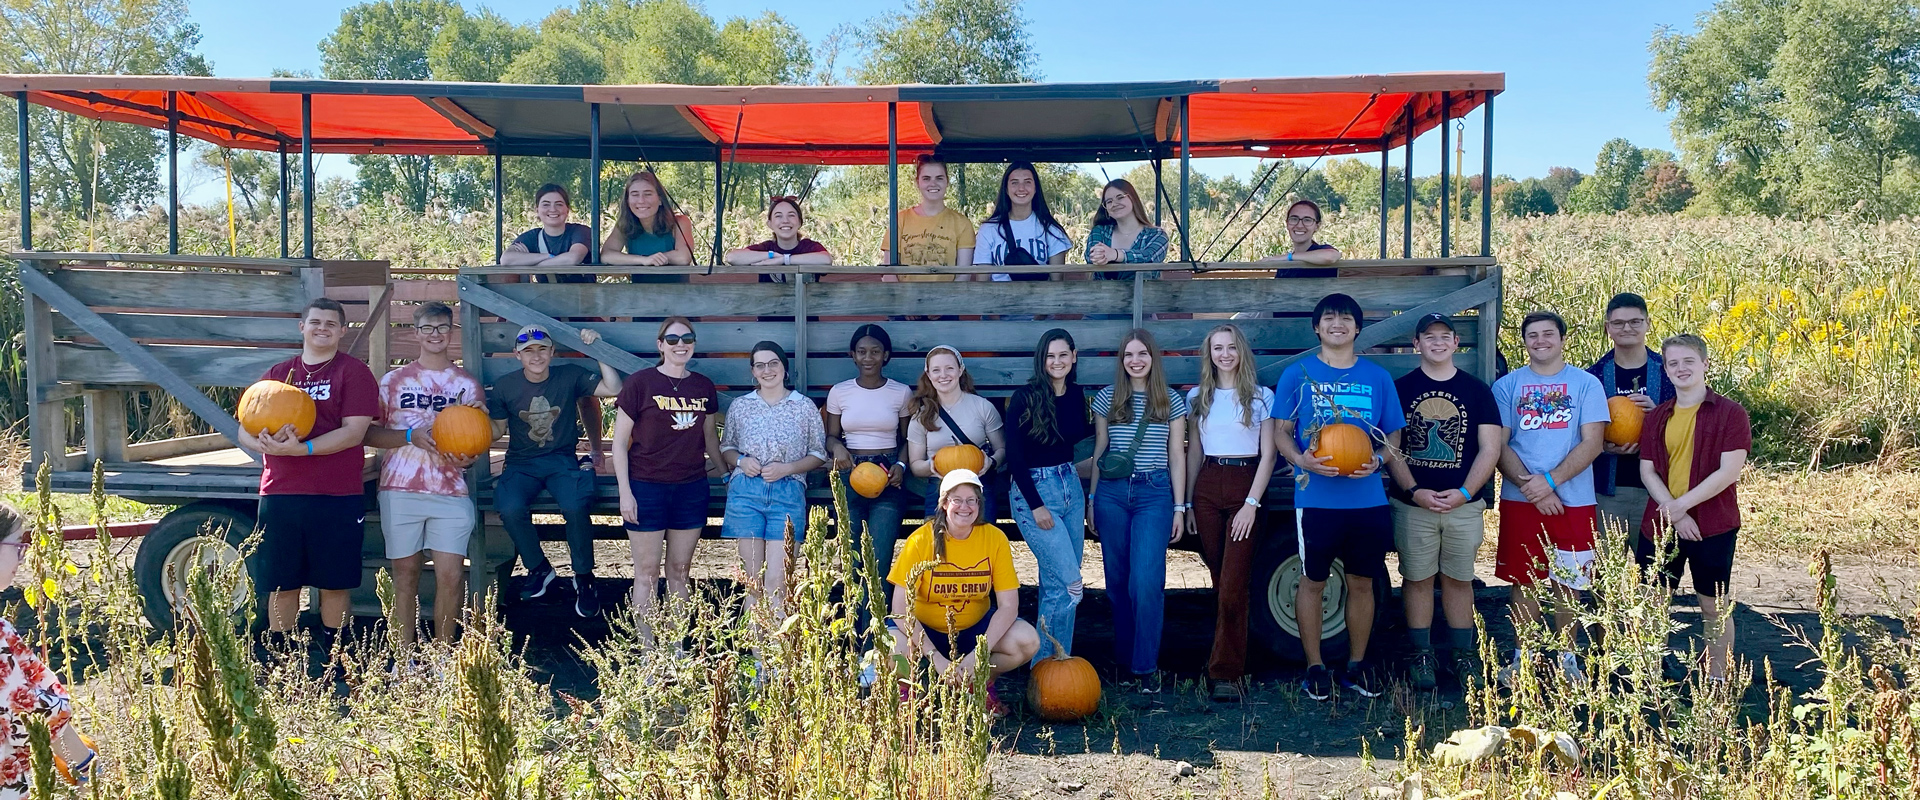 photo of Honors Program students participating in a hayride at a pumpkin patch